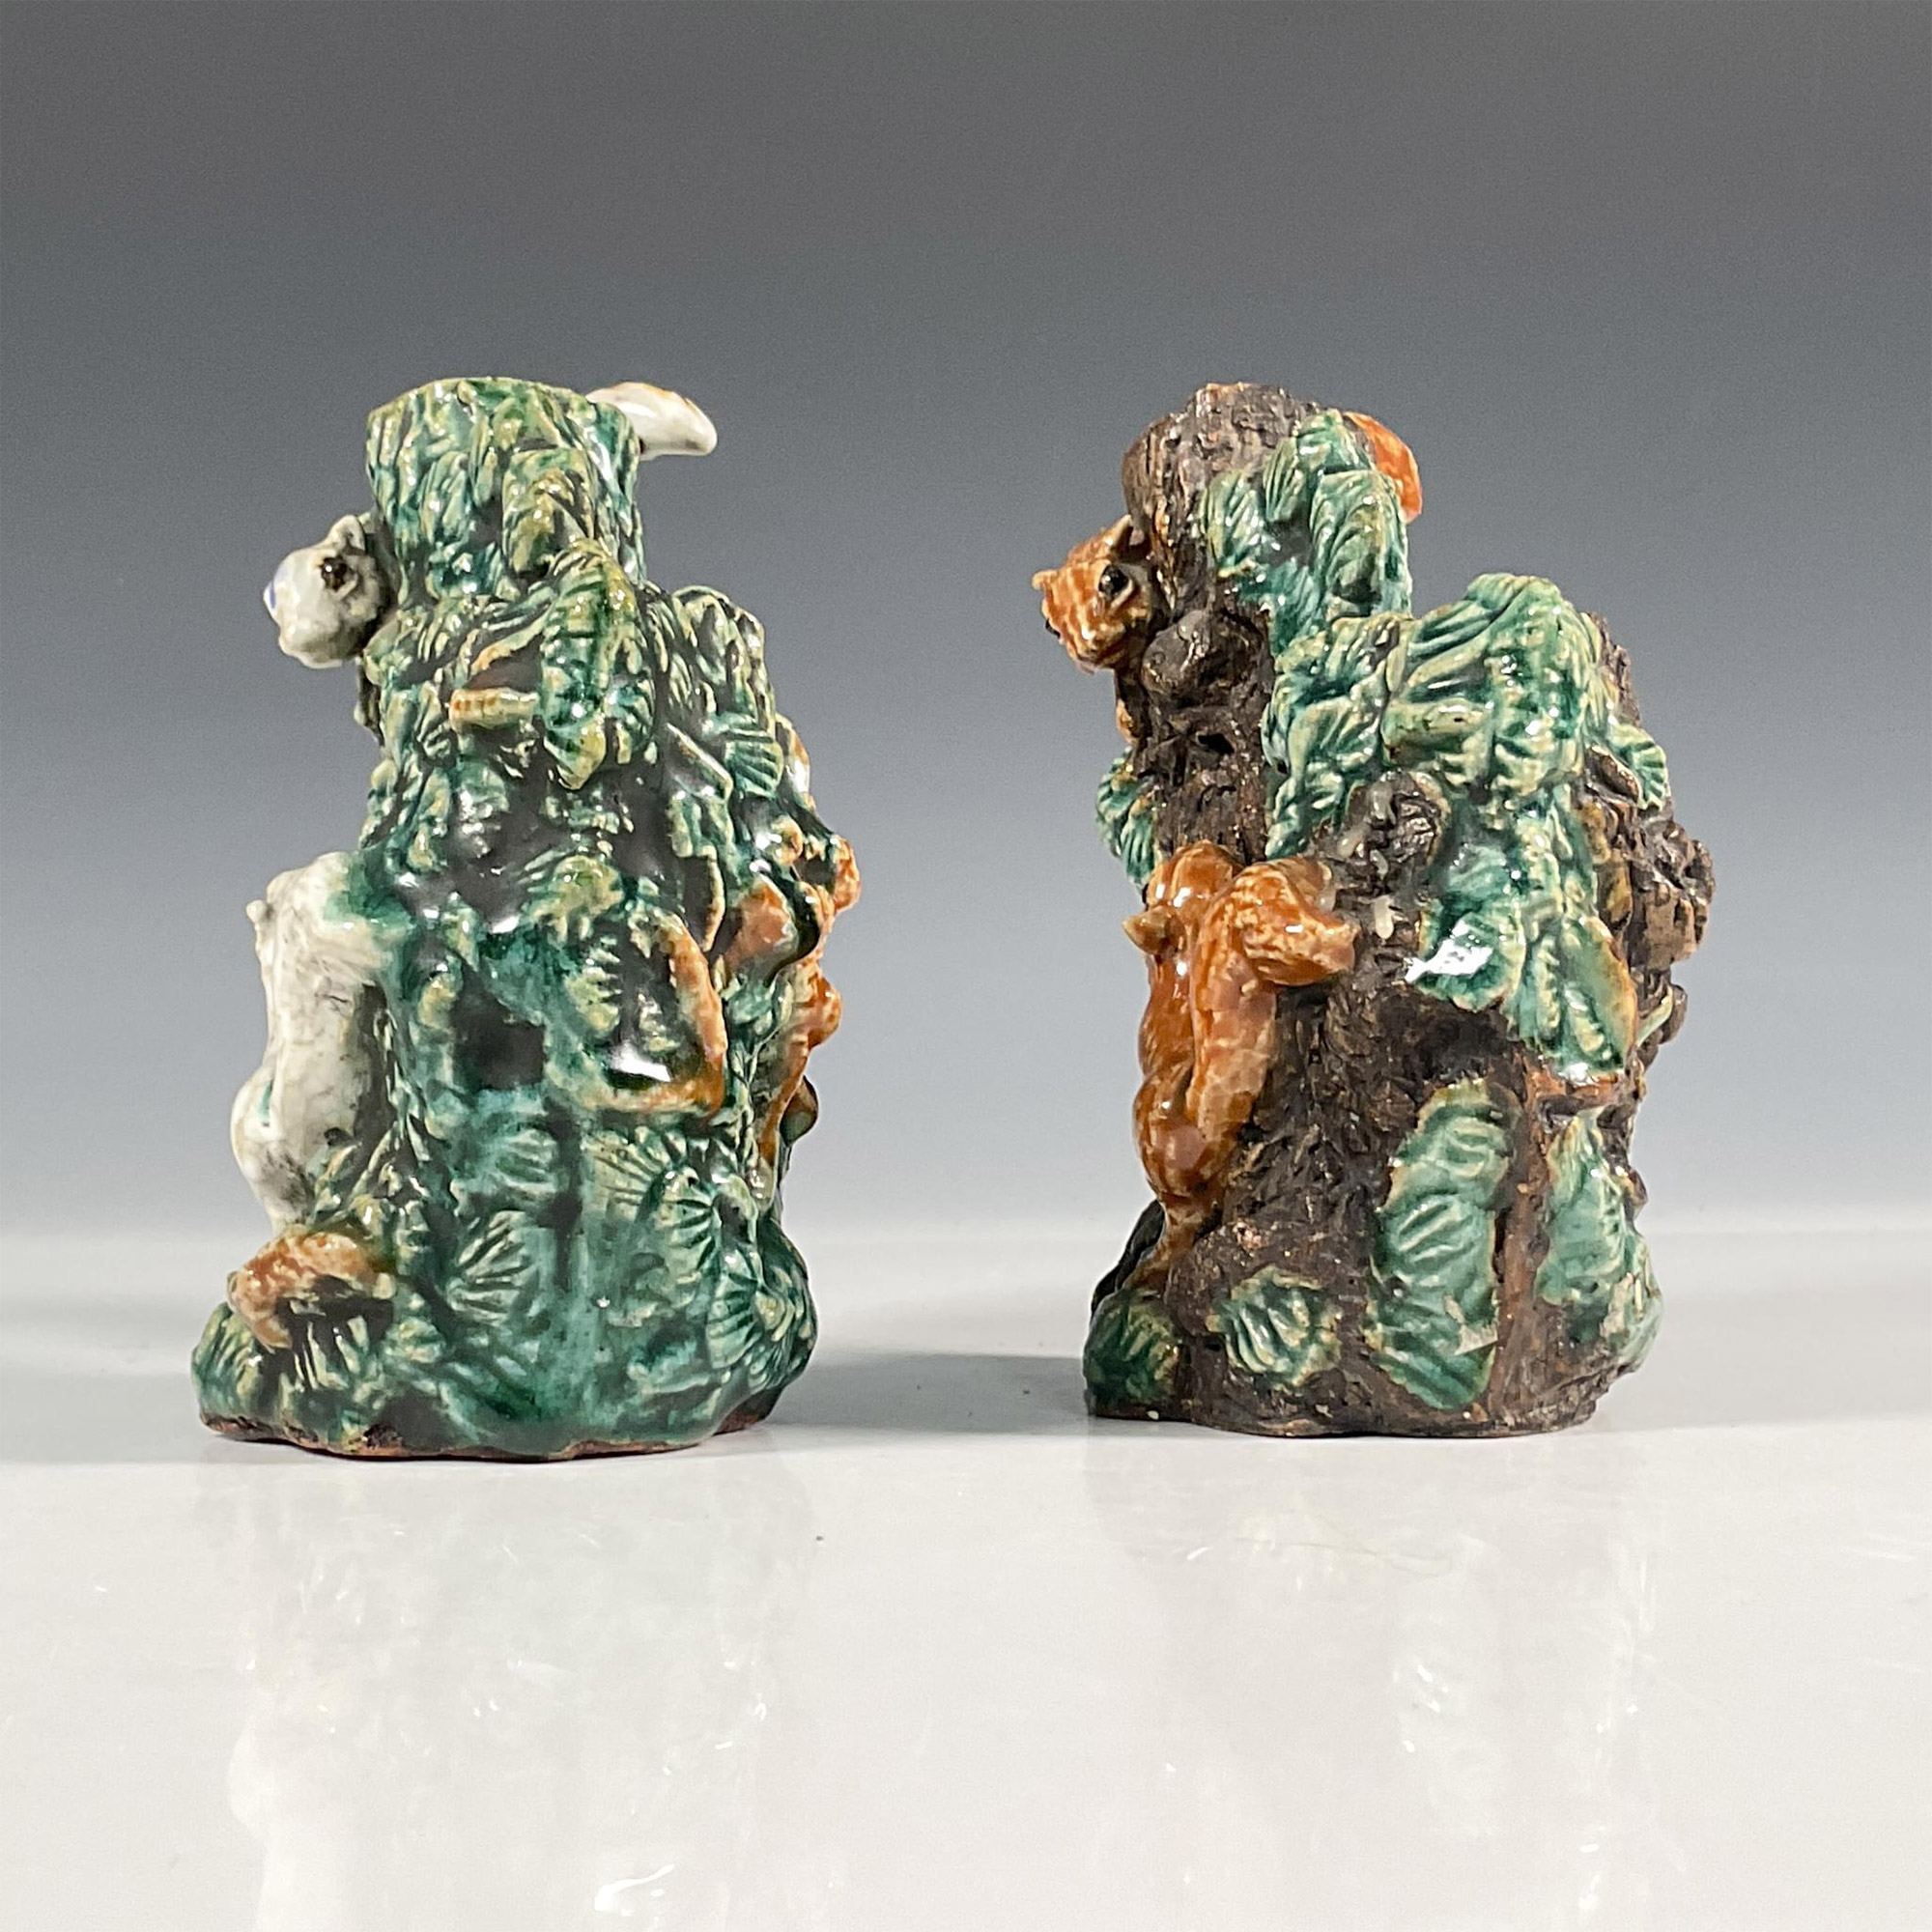 Pair of Majolica Glazed Porcelain Candle Holders - Image 2 of 4